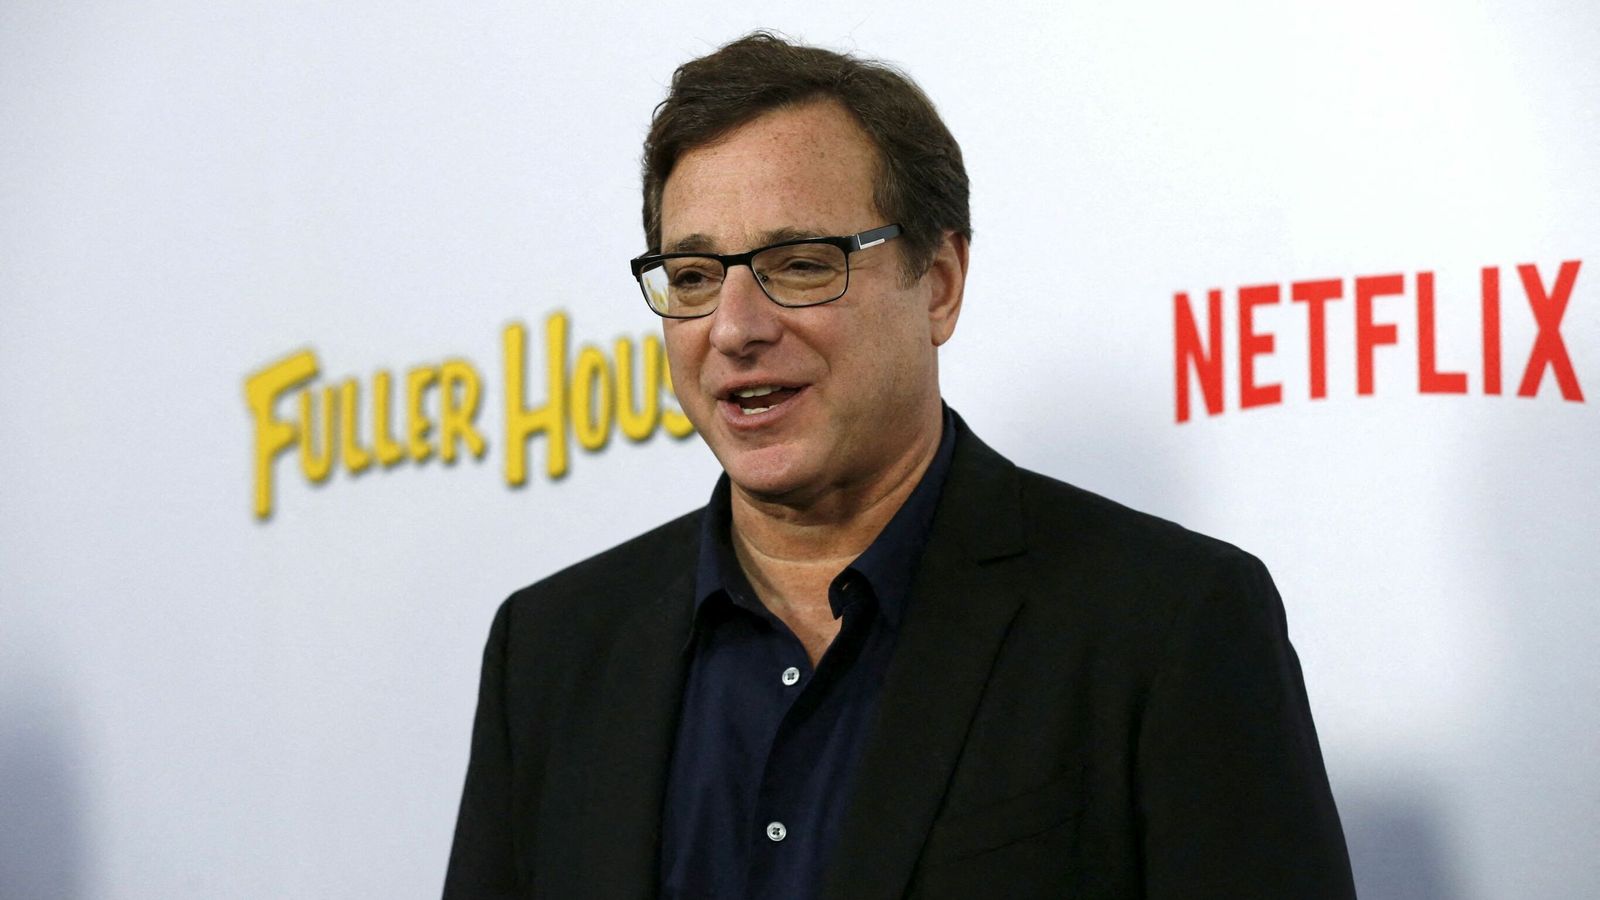 Comedian Bob Saget, best known for his role in Full House, dies aged 65